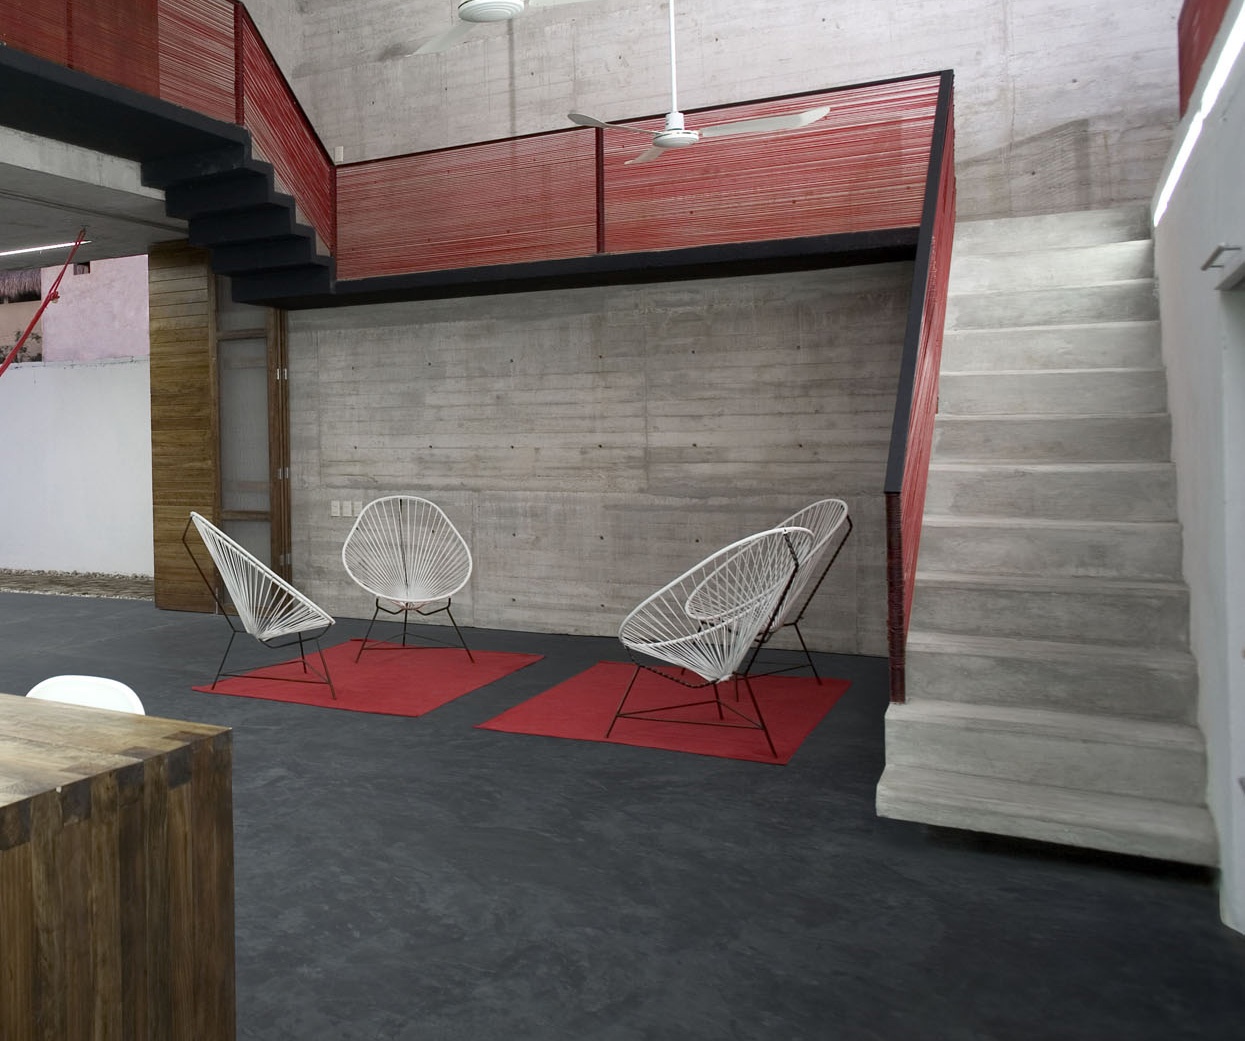 Staircase in concrete and red balustrade